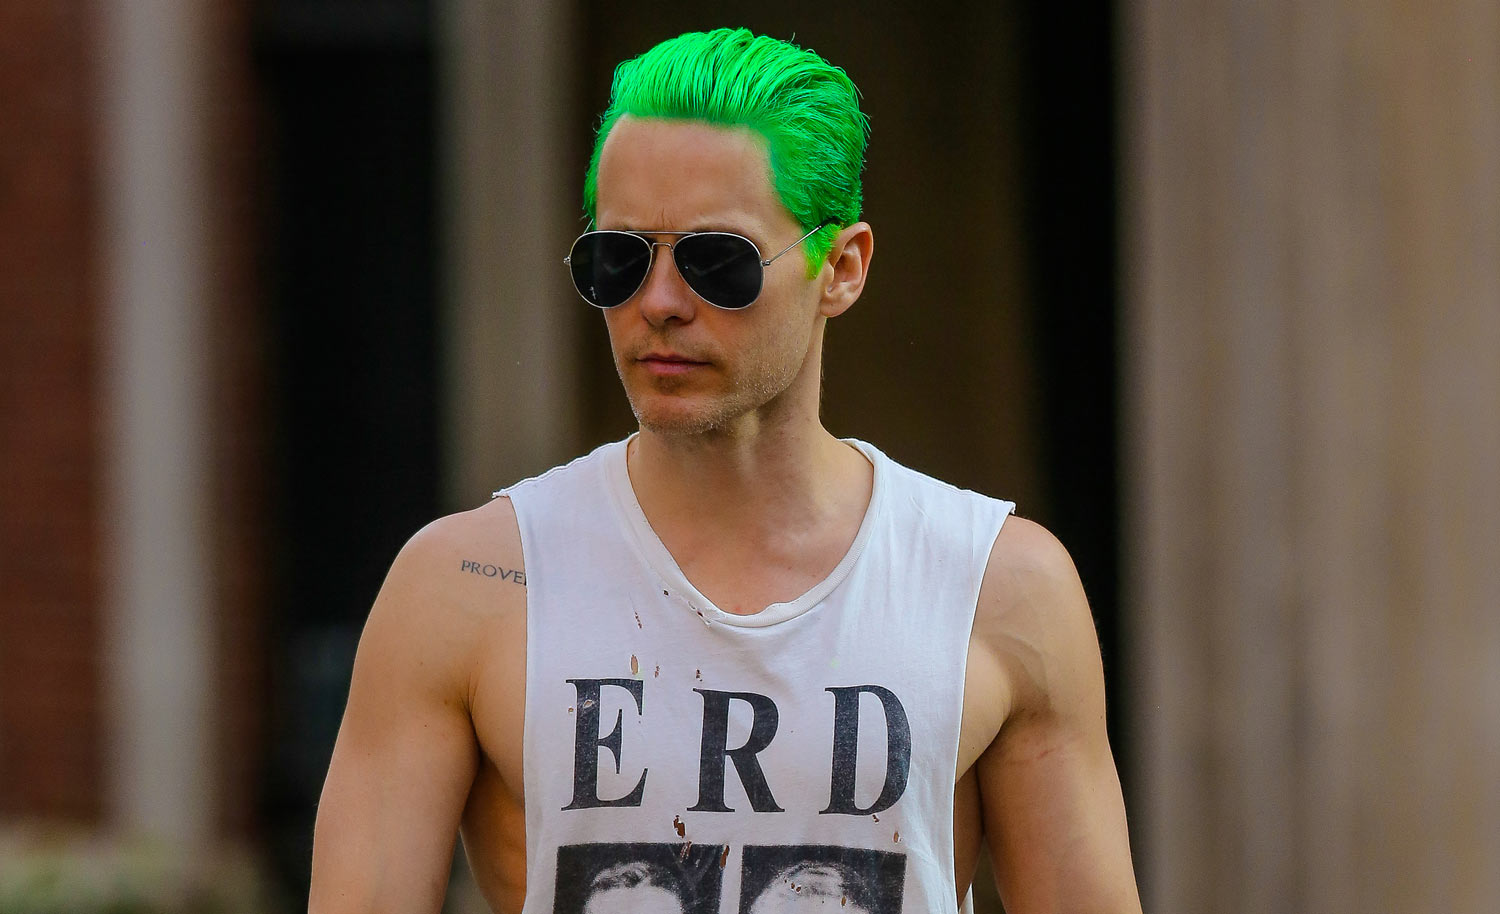 jared_leto_green_haired